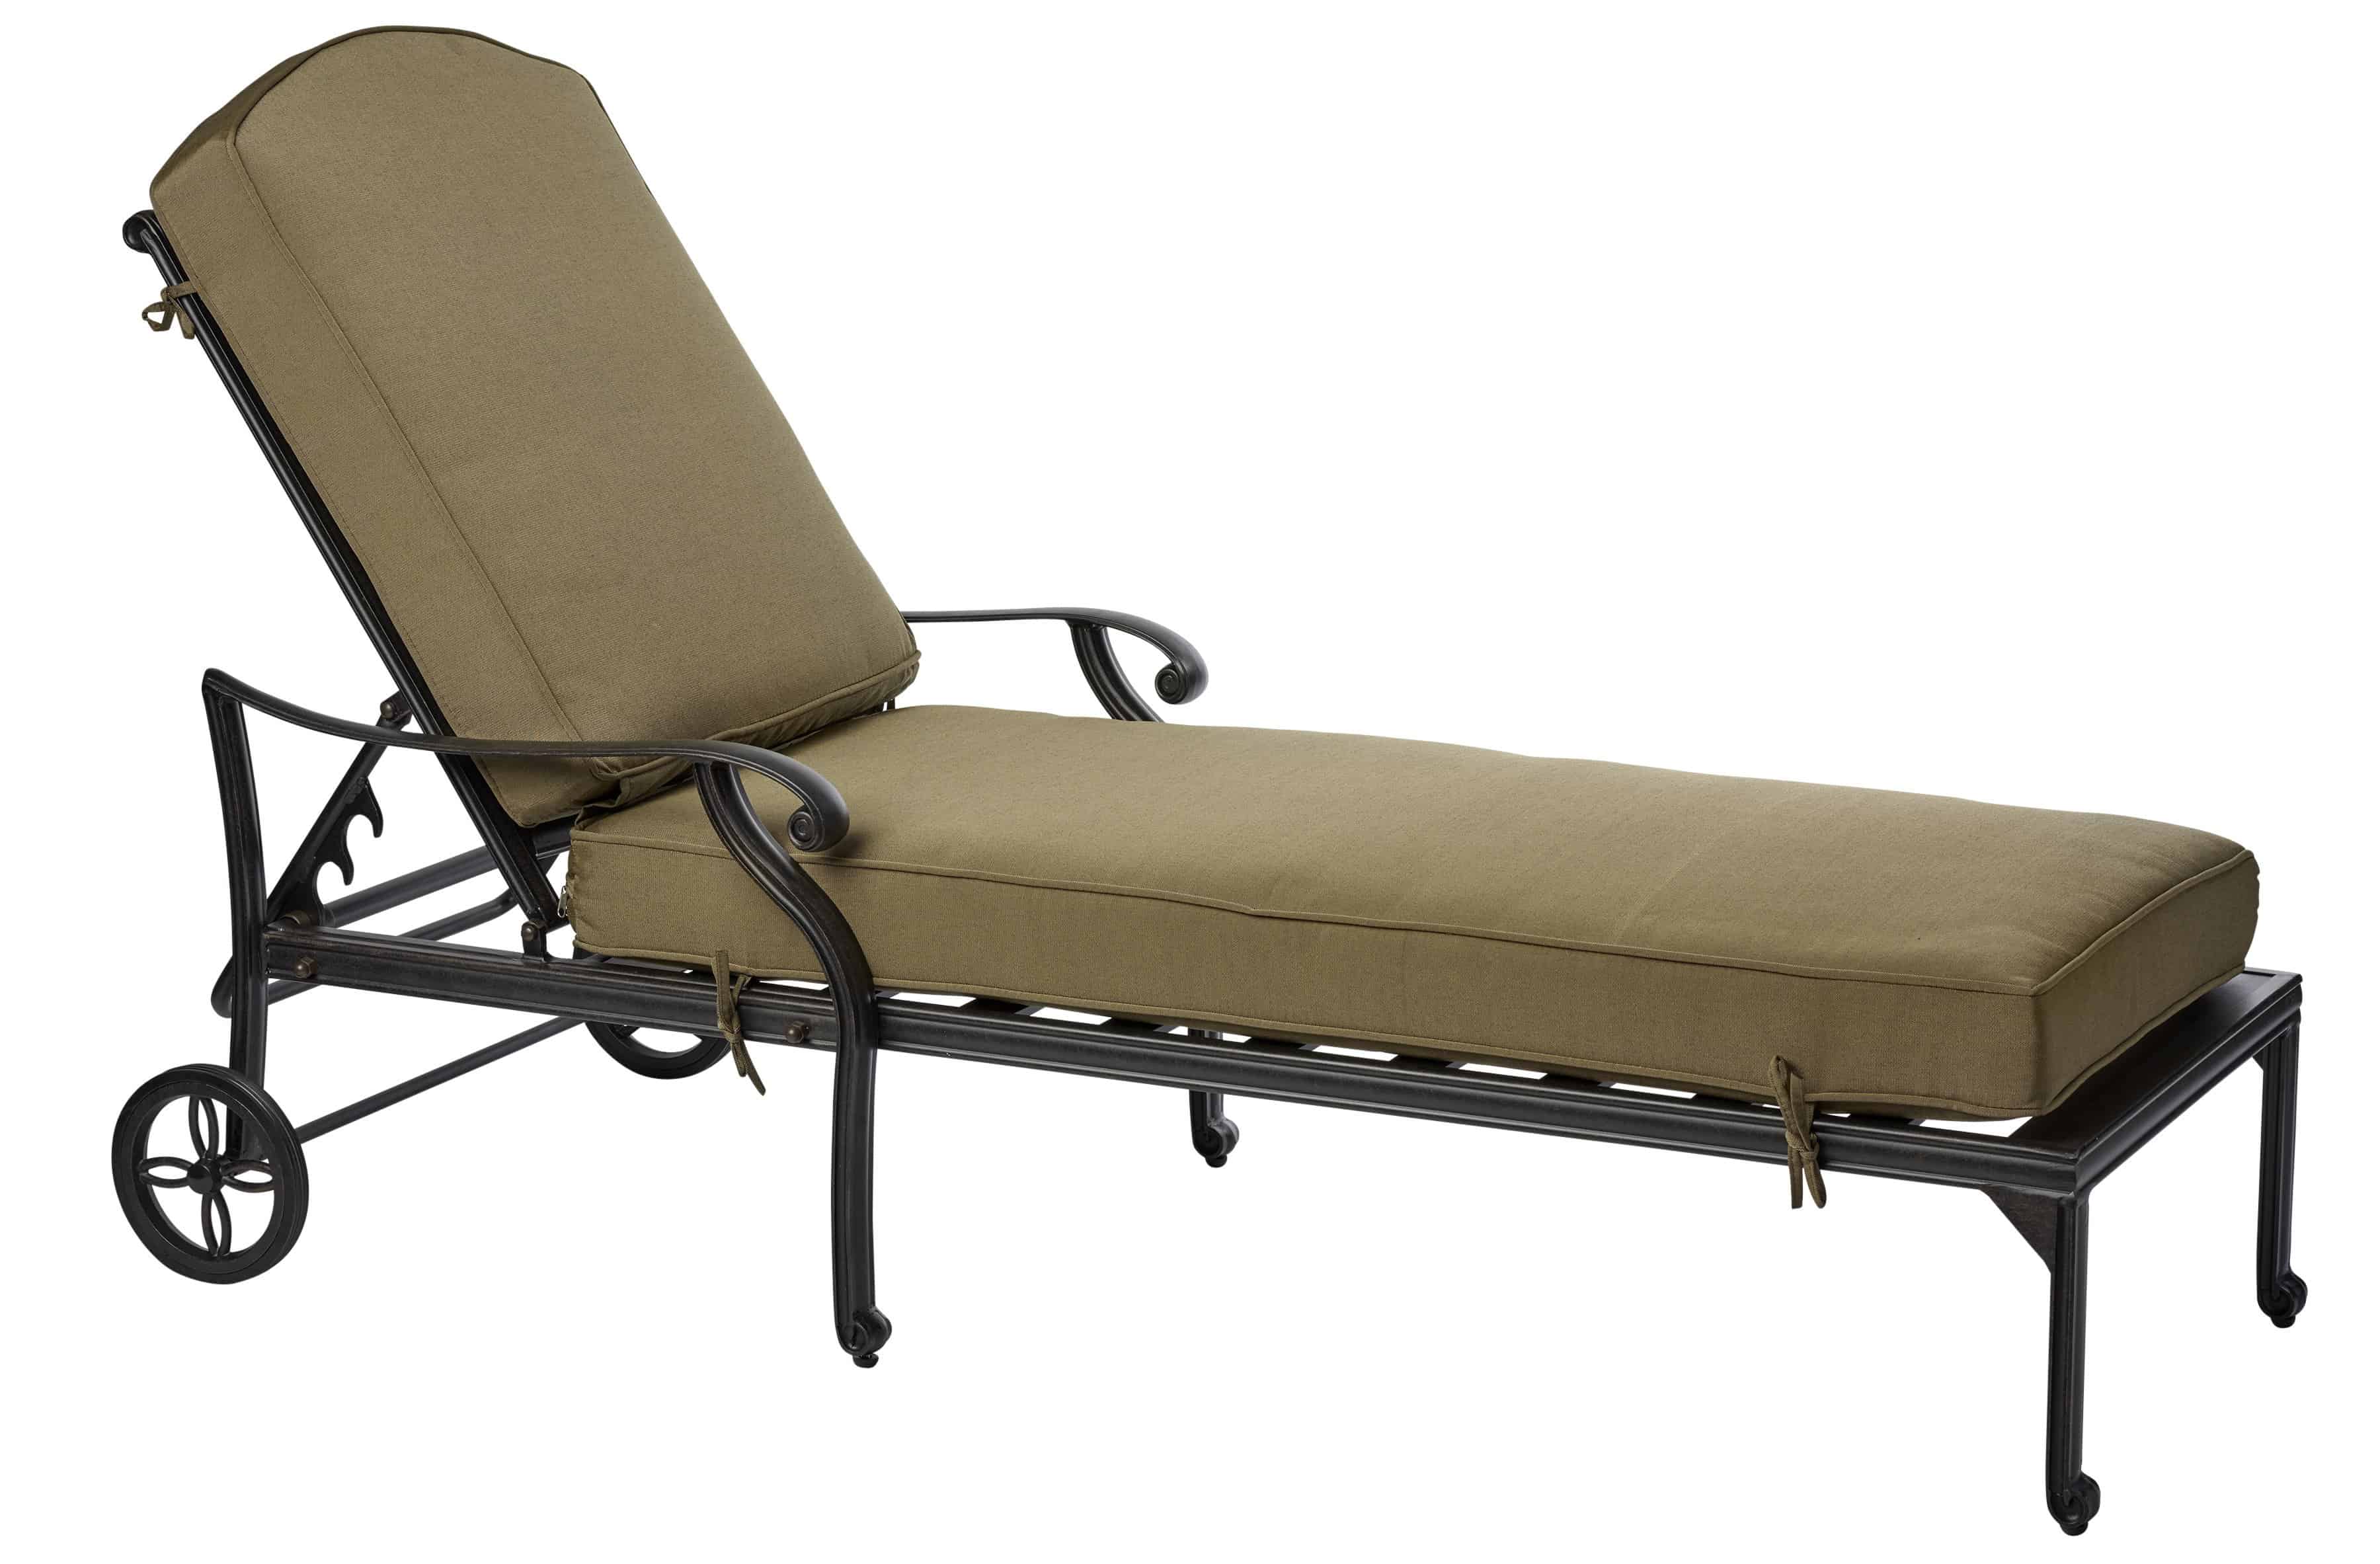 Melton Craft LD8176-9 Sunlounge with Cushion - Tucker Barbecues